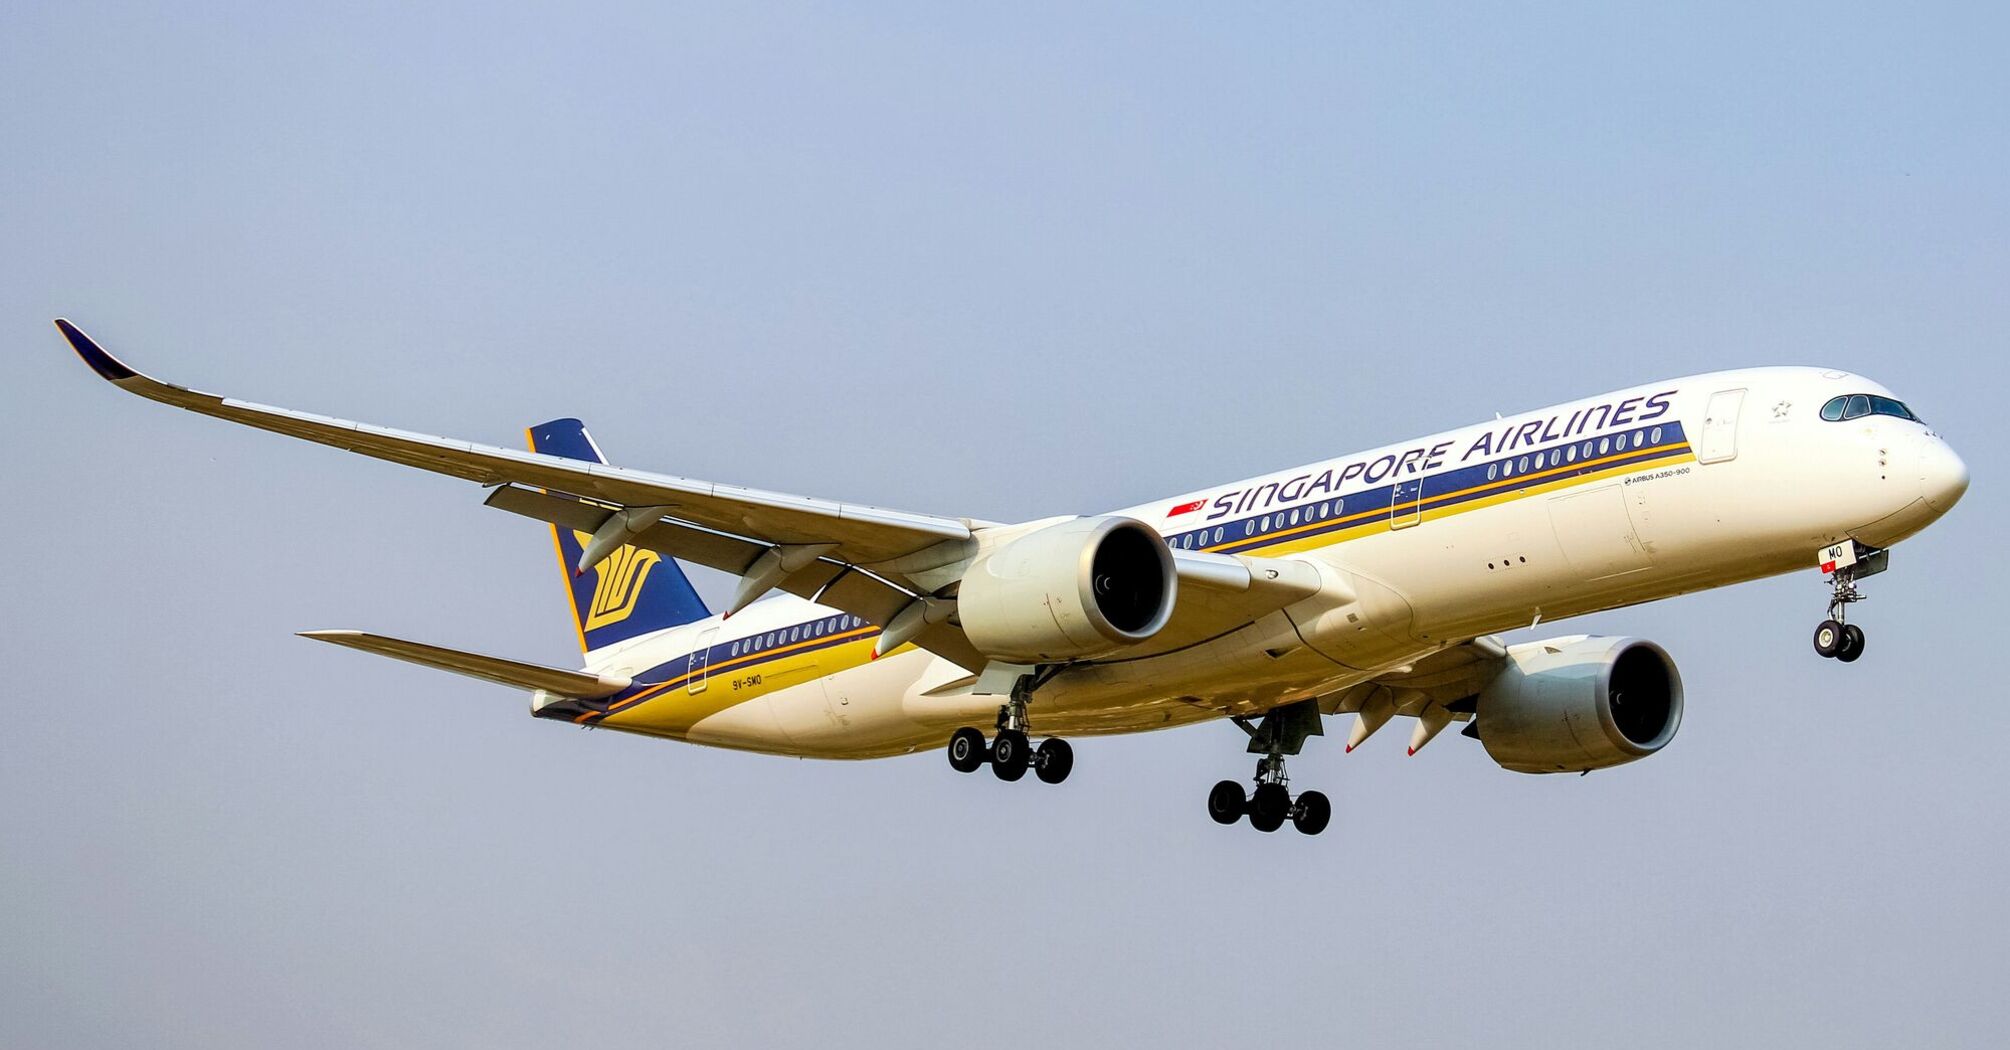 white and blue Singapore Airlines passenger plane in mid air during daytime